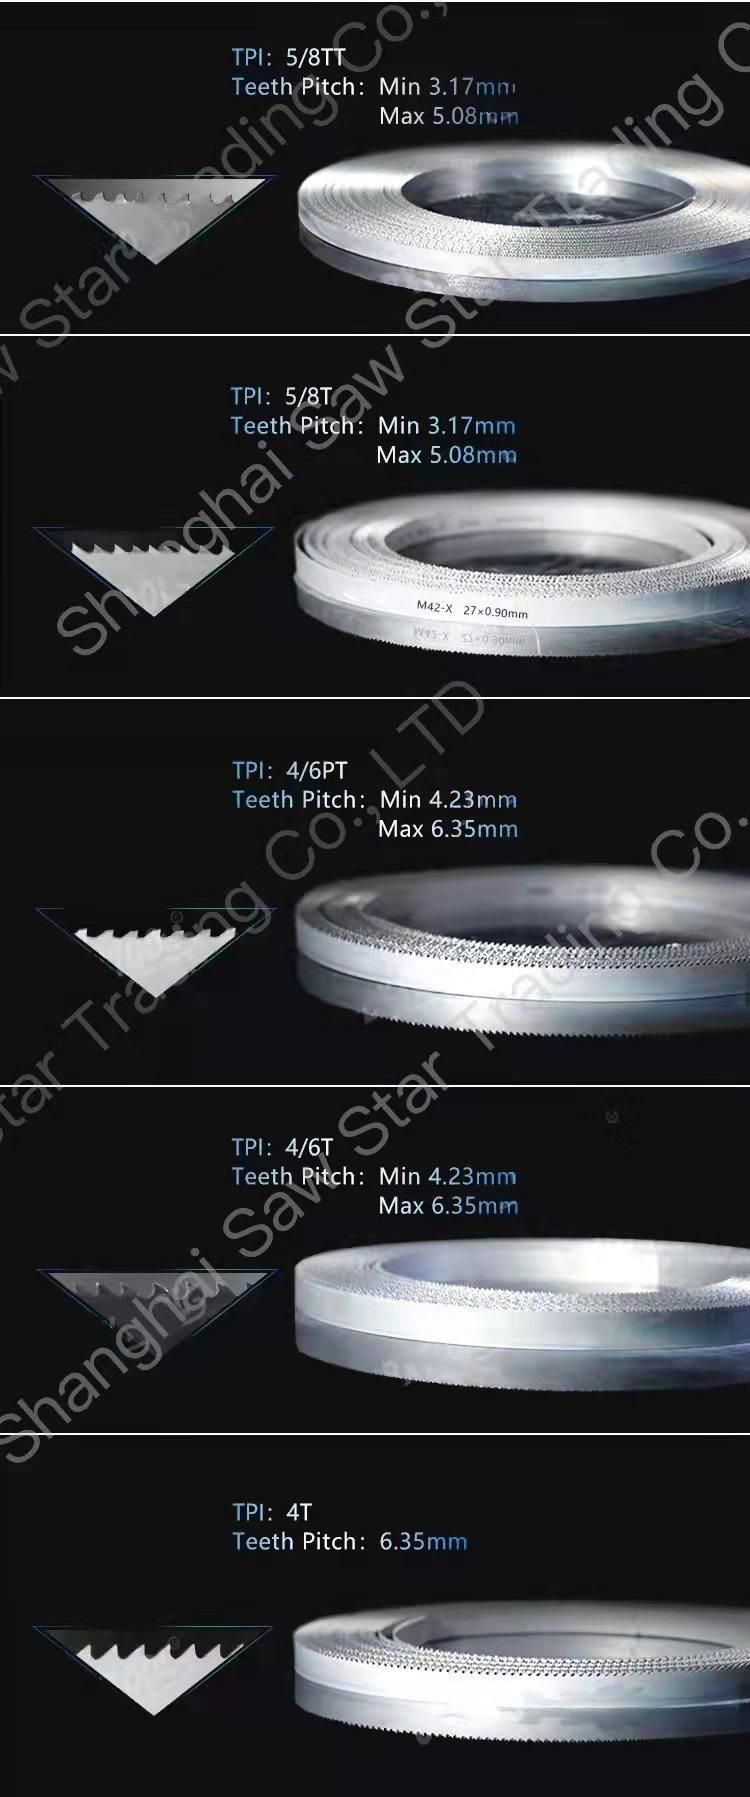 34mm * 1.1mm * 4560* 2/3 Tooth Saw Blade for Cutting The Best Quality